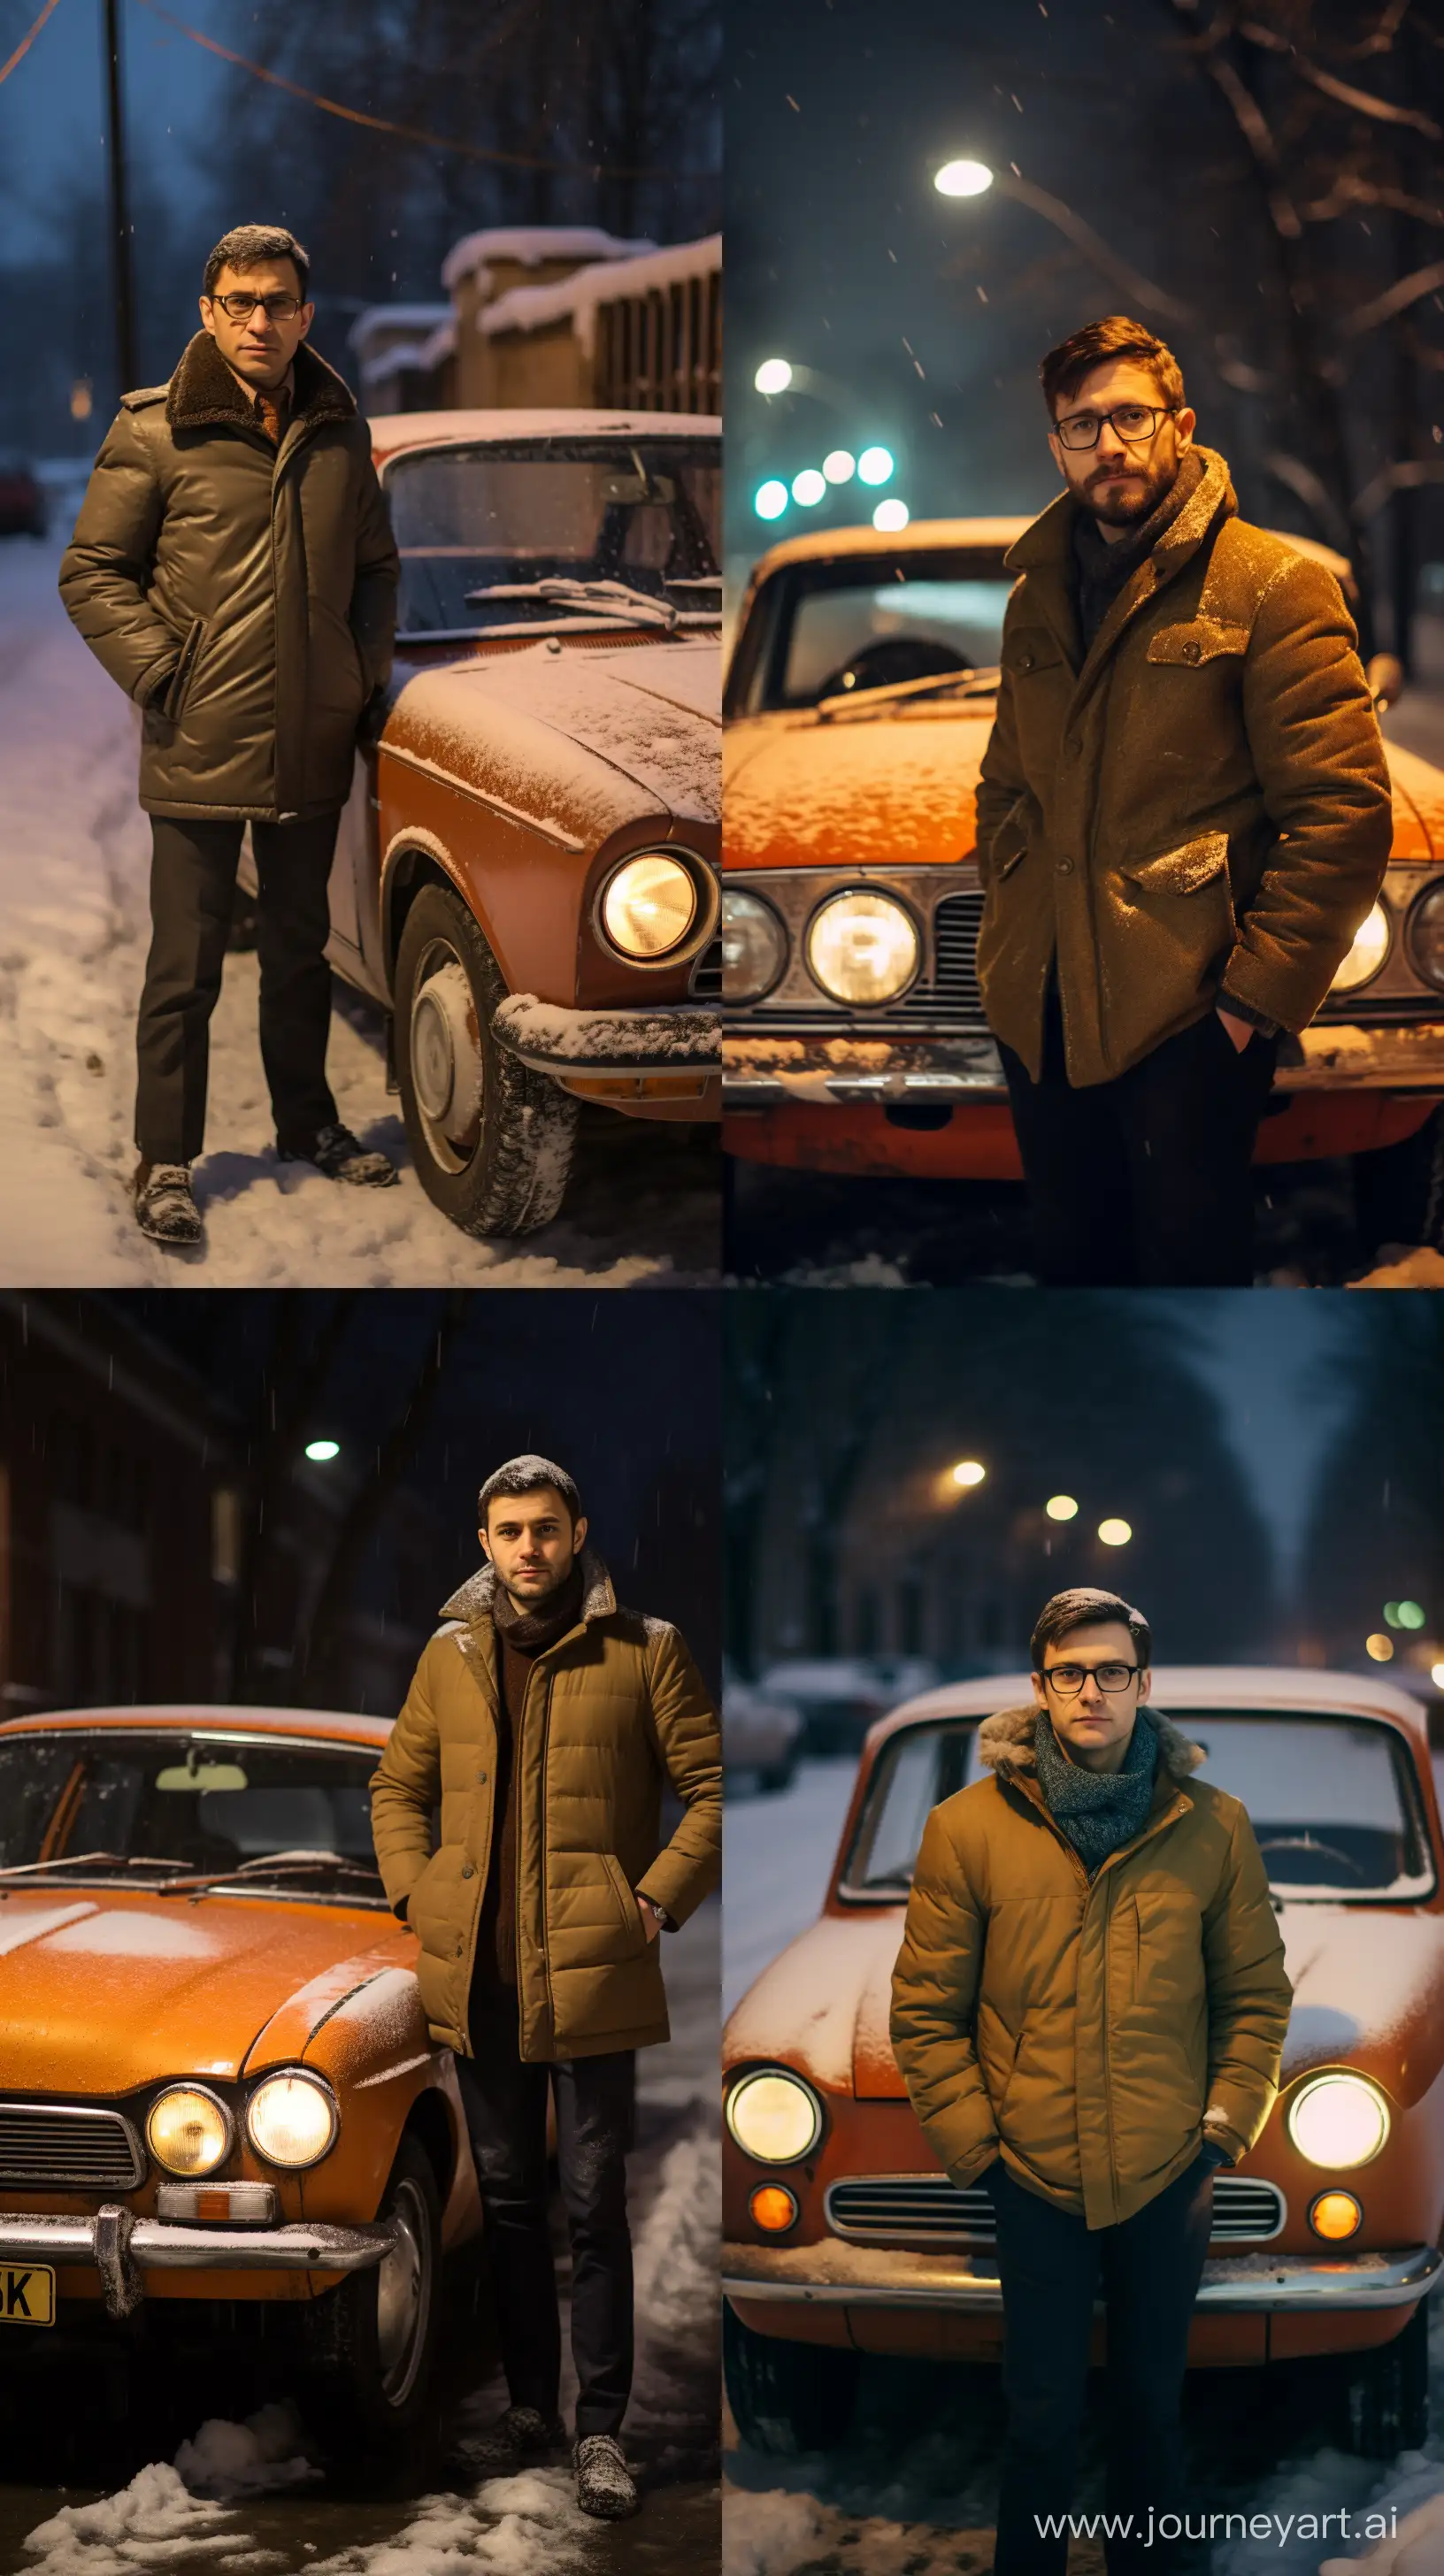 Stylishly-Dressed-Man-from-60s-and-70s-USSR-by-Vintage-Car-in-Winter-Evening